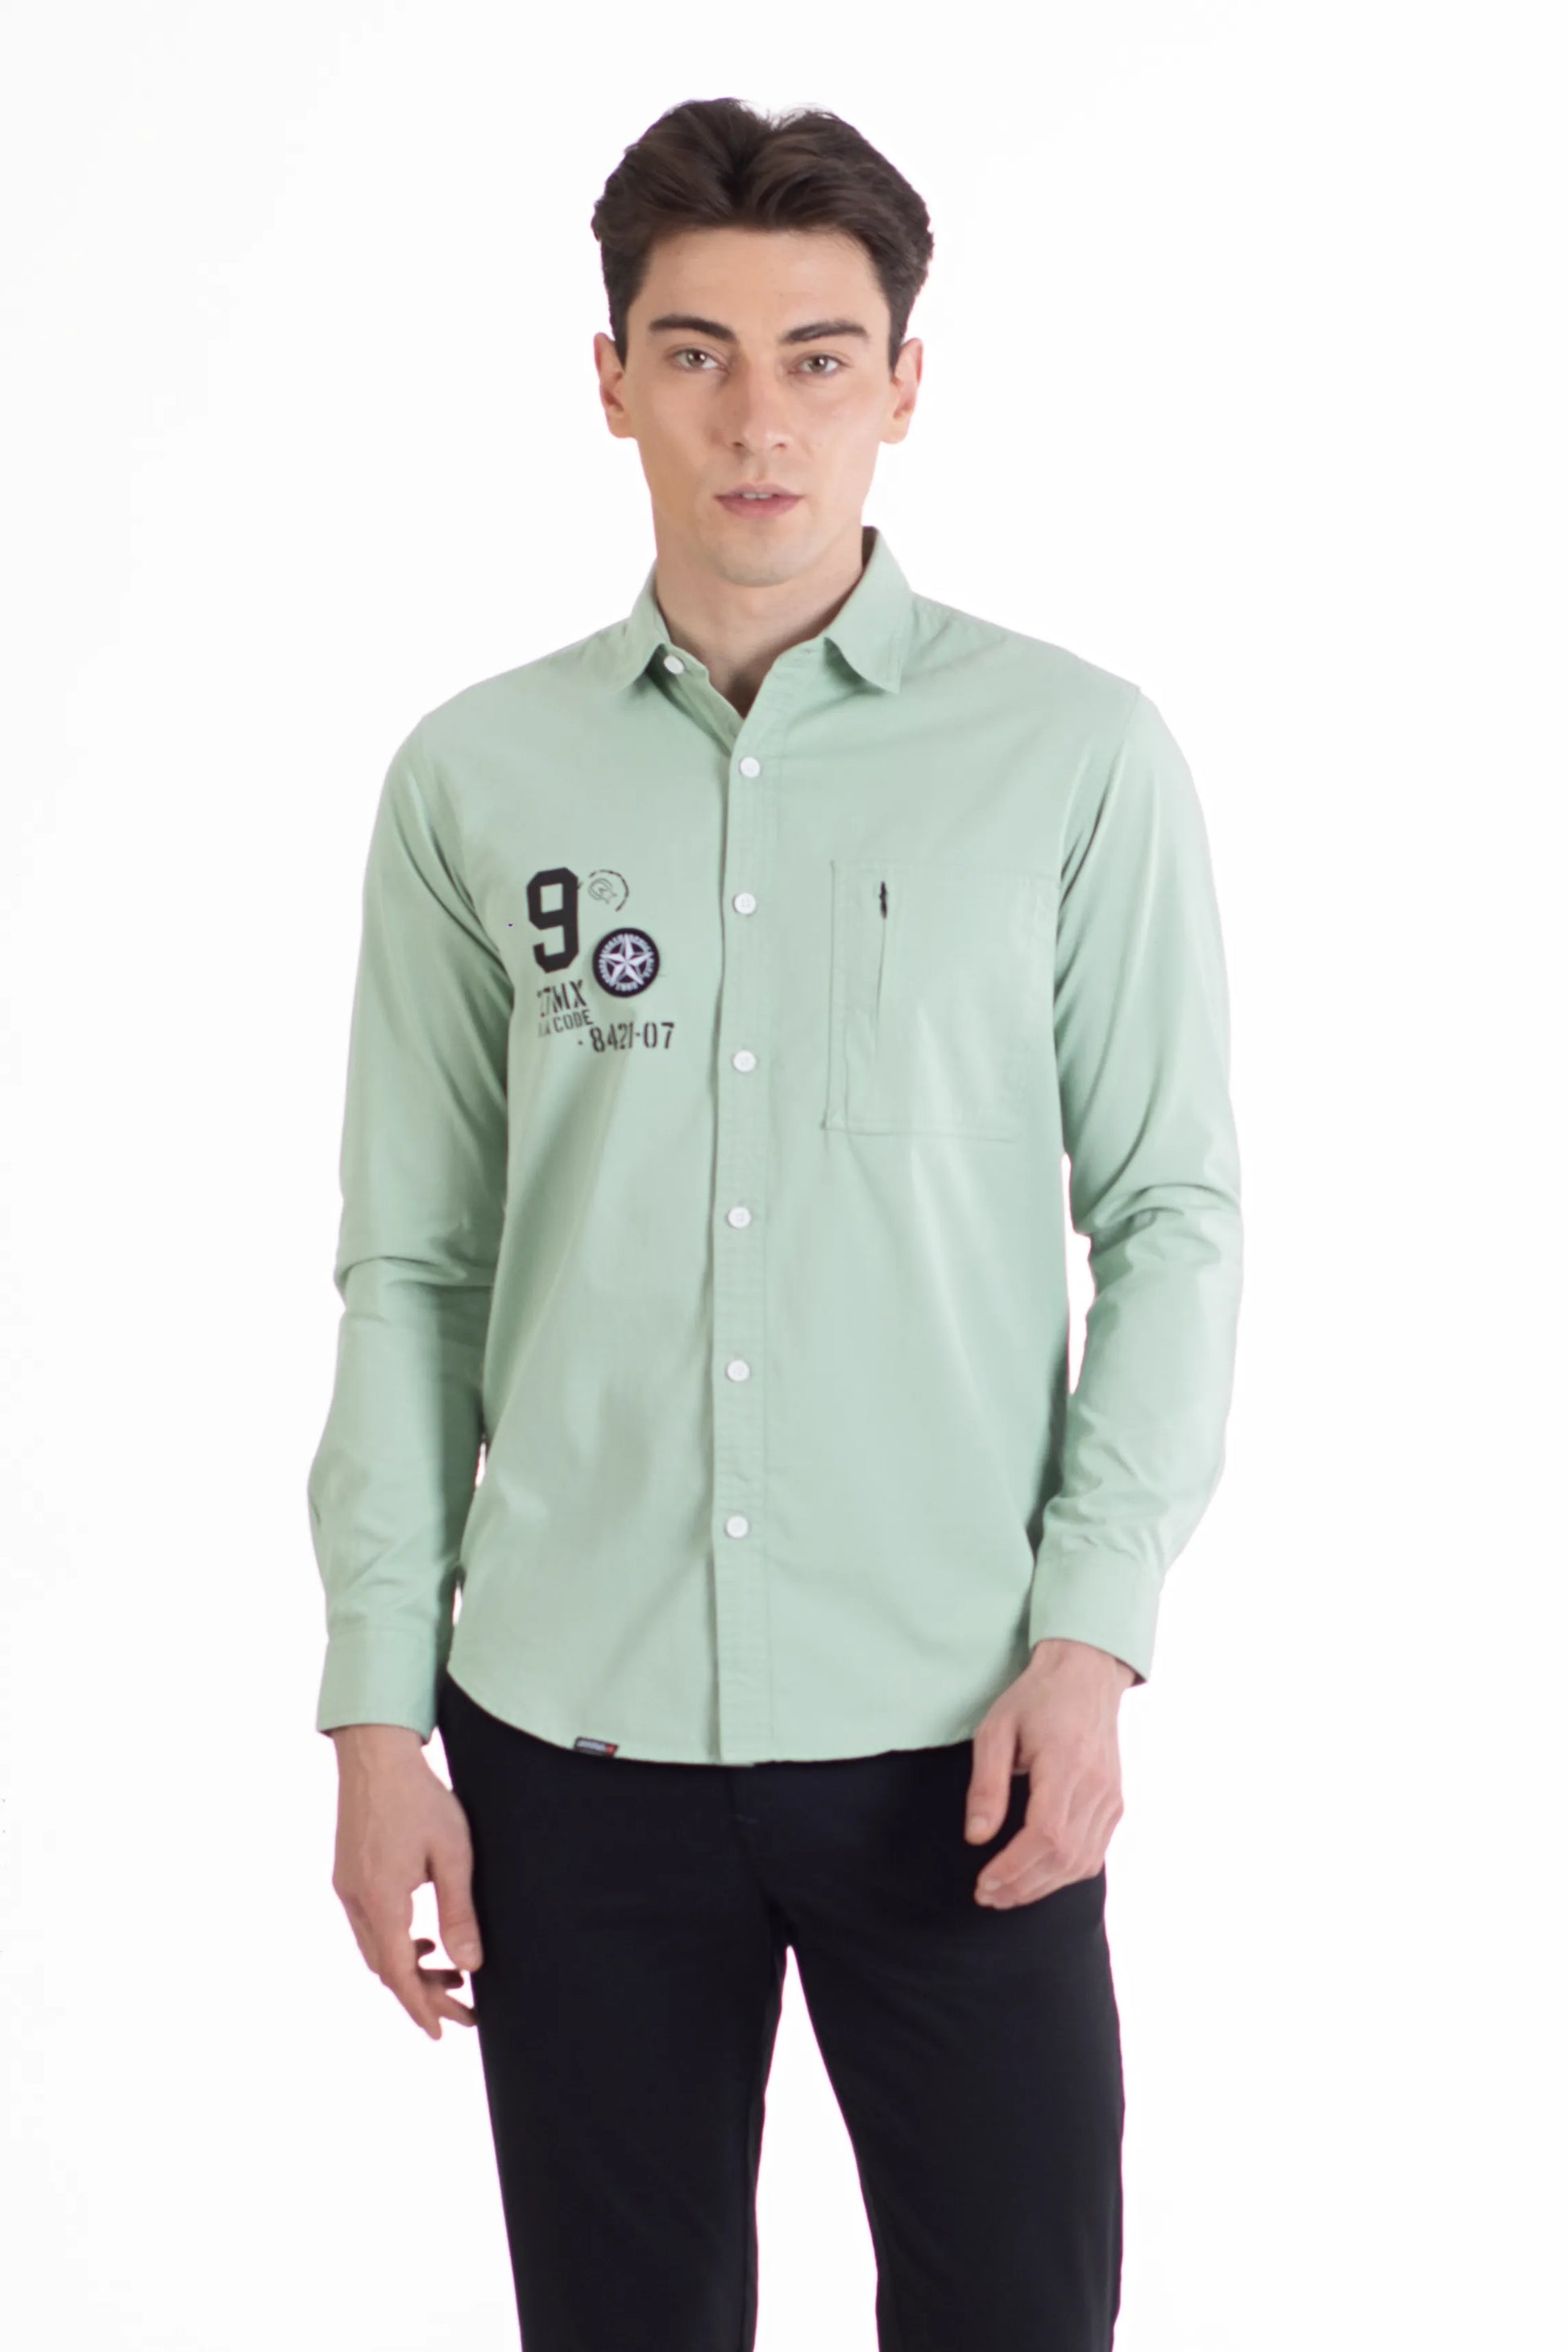 Buy Chest Printed Shirt Online.